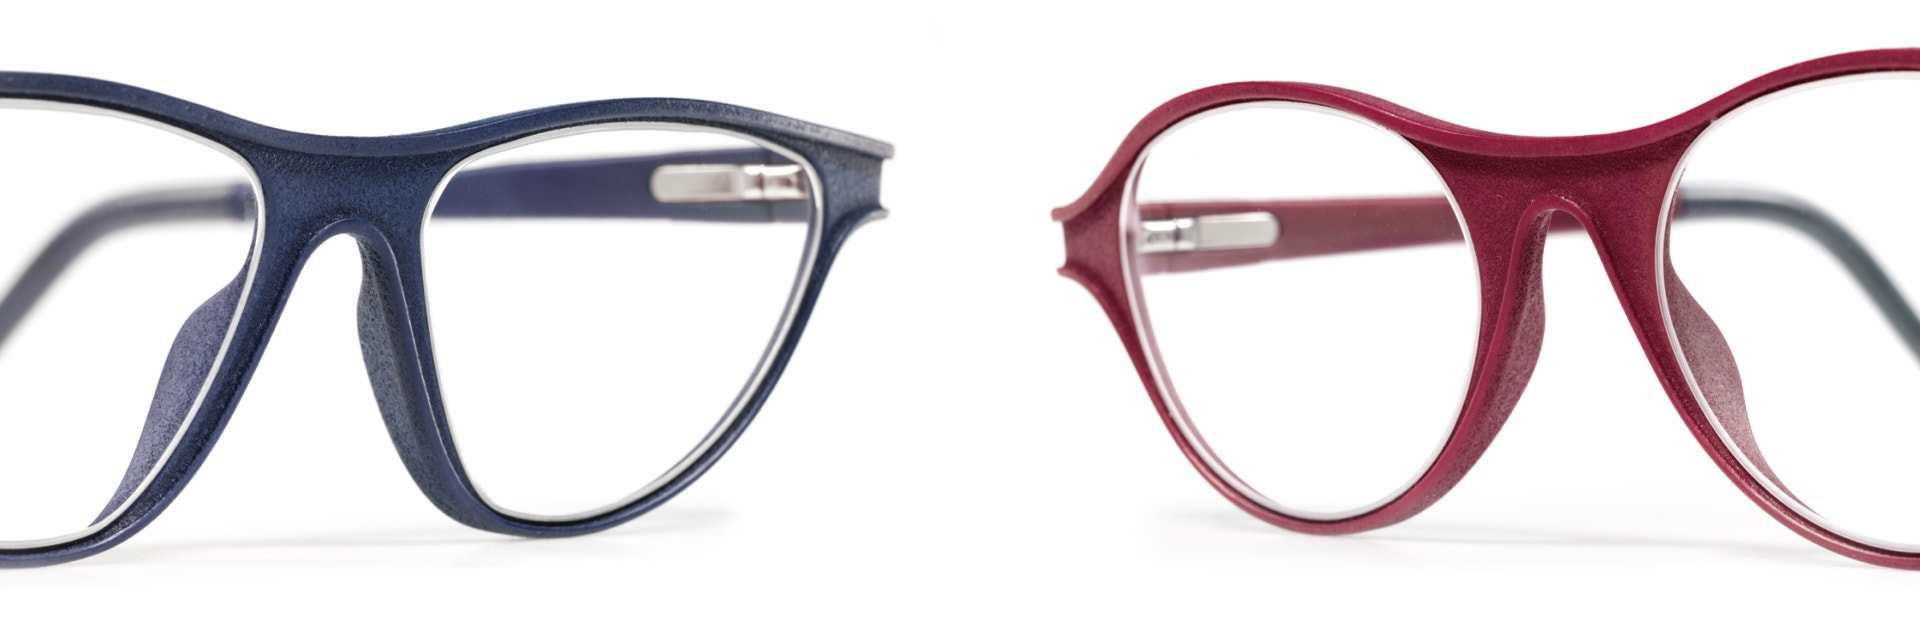 Two pairs of 3D-printed eyewear frames in the Luxura finish, one in jeans blue and one in raspberry red